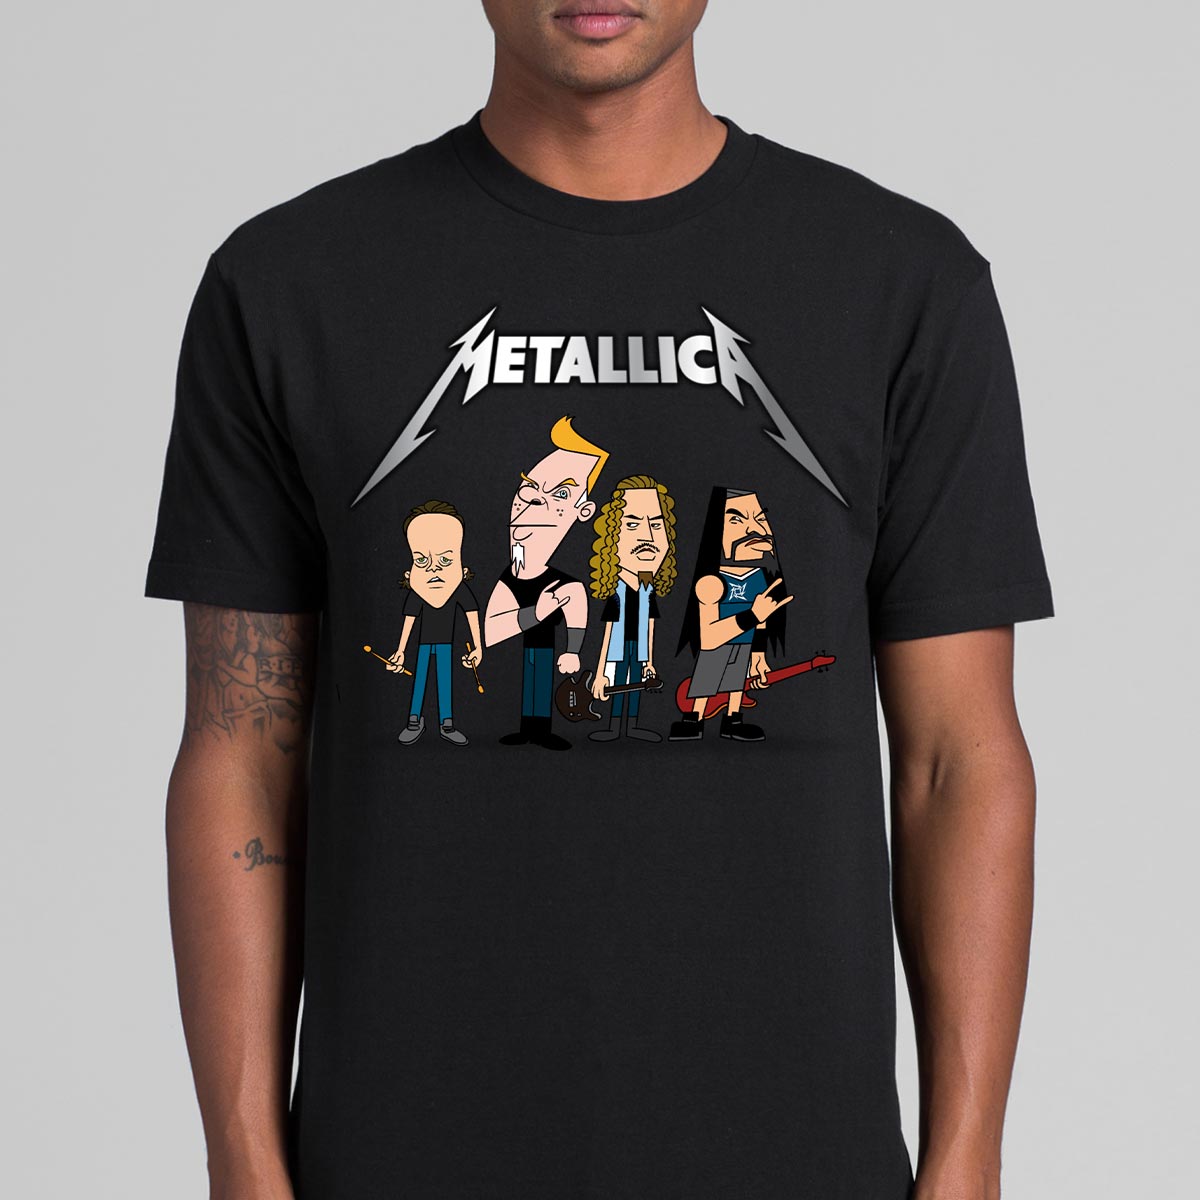 Metallica 02 T-Shirt Band Family Tee Music Rock And Roll